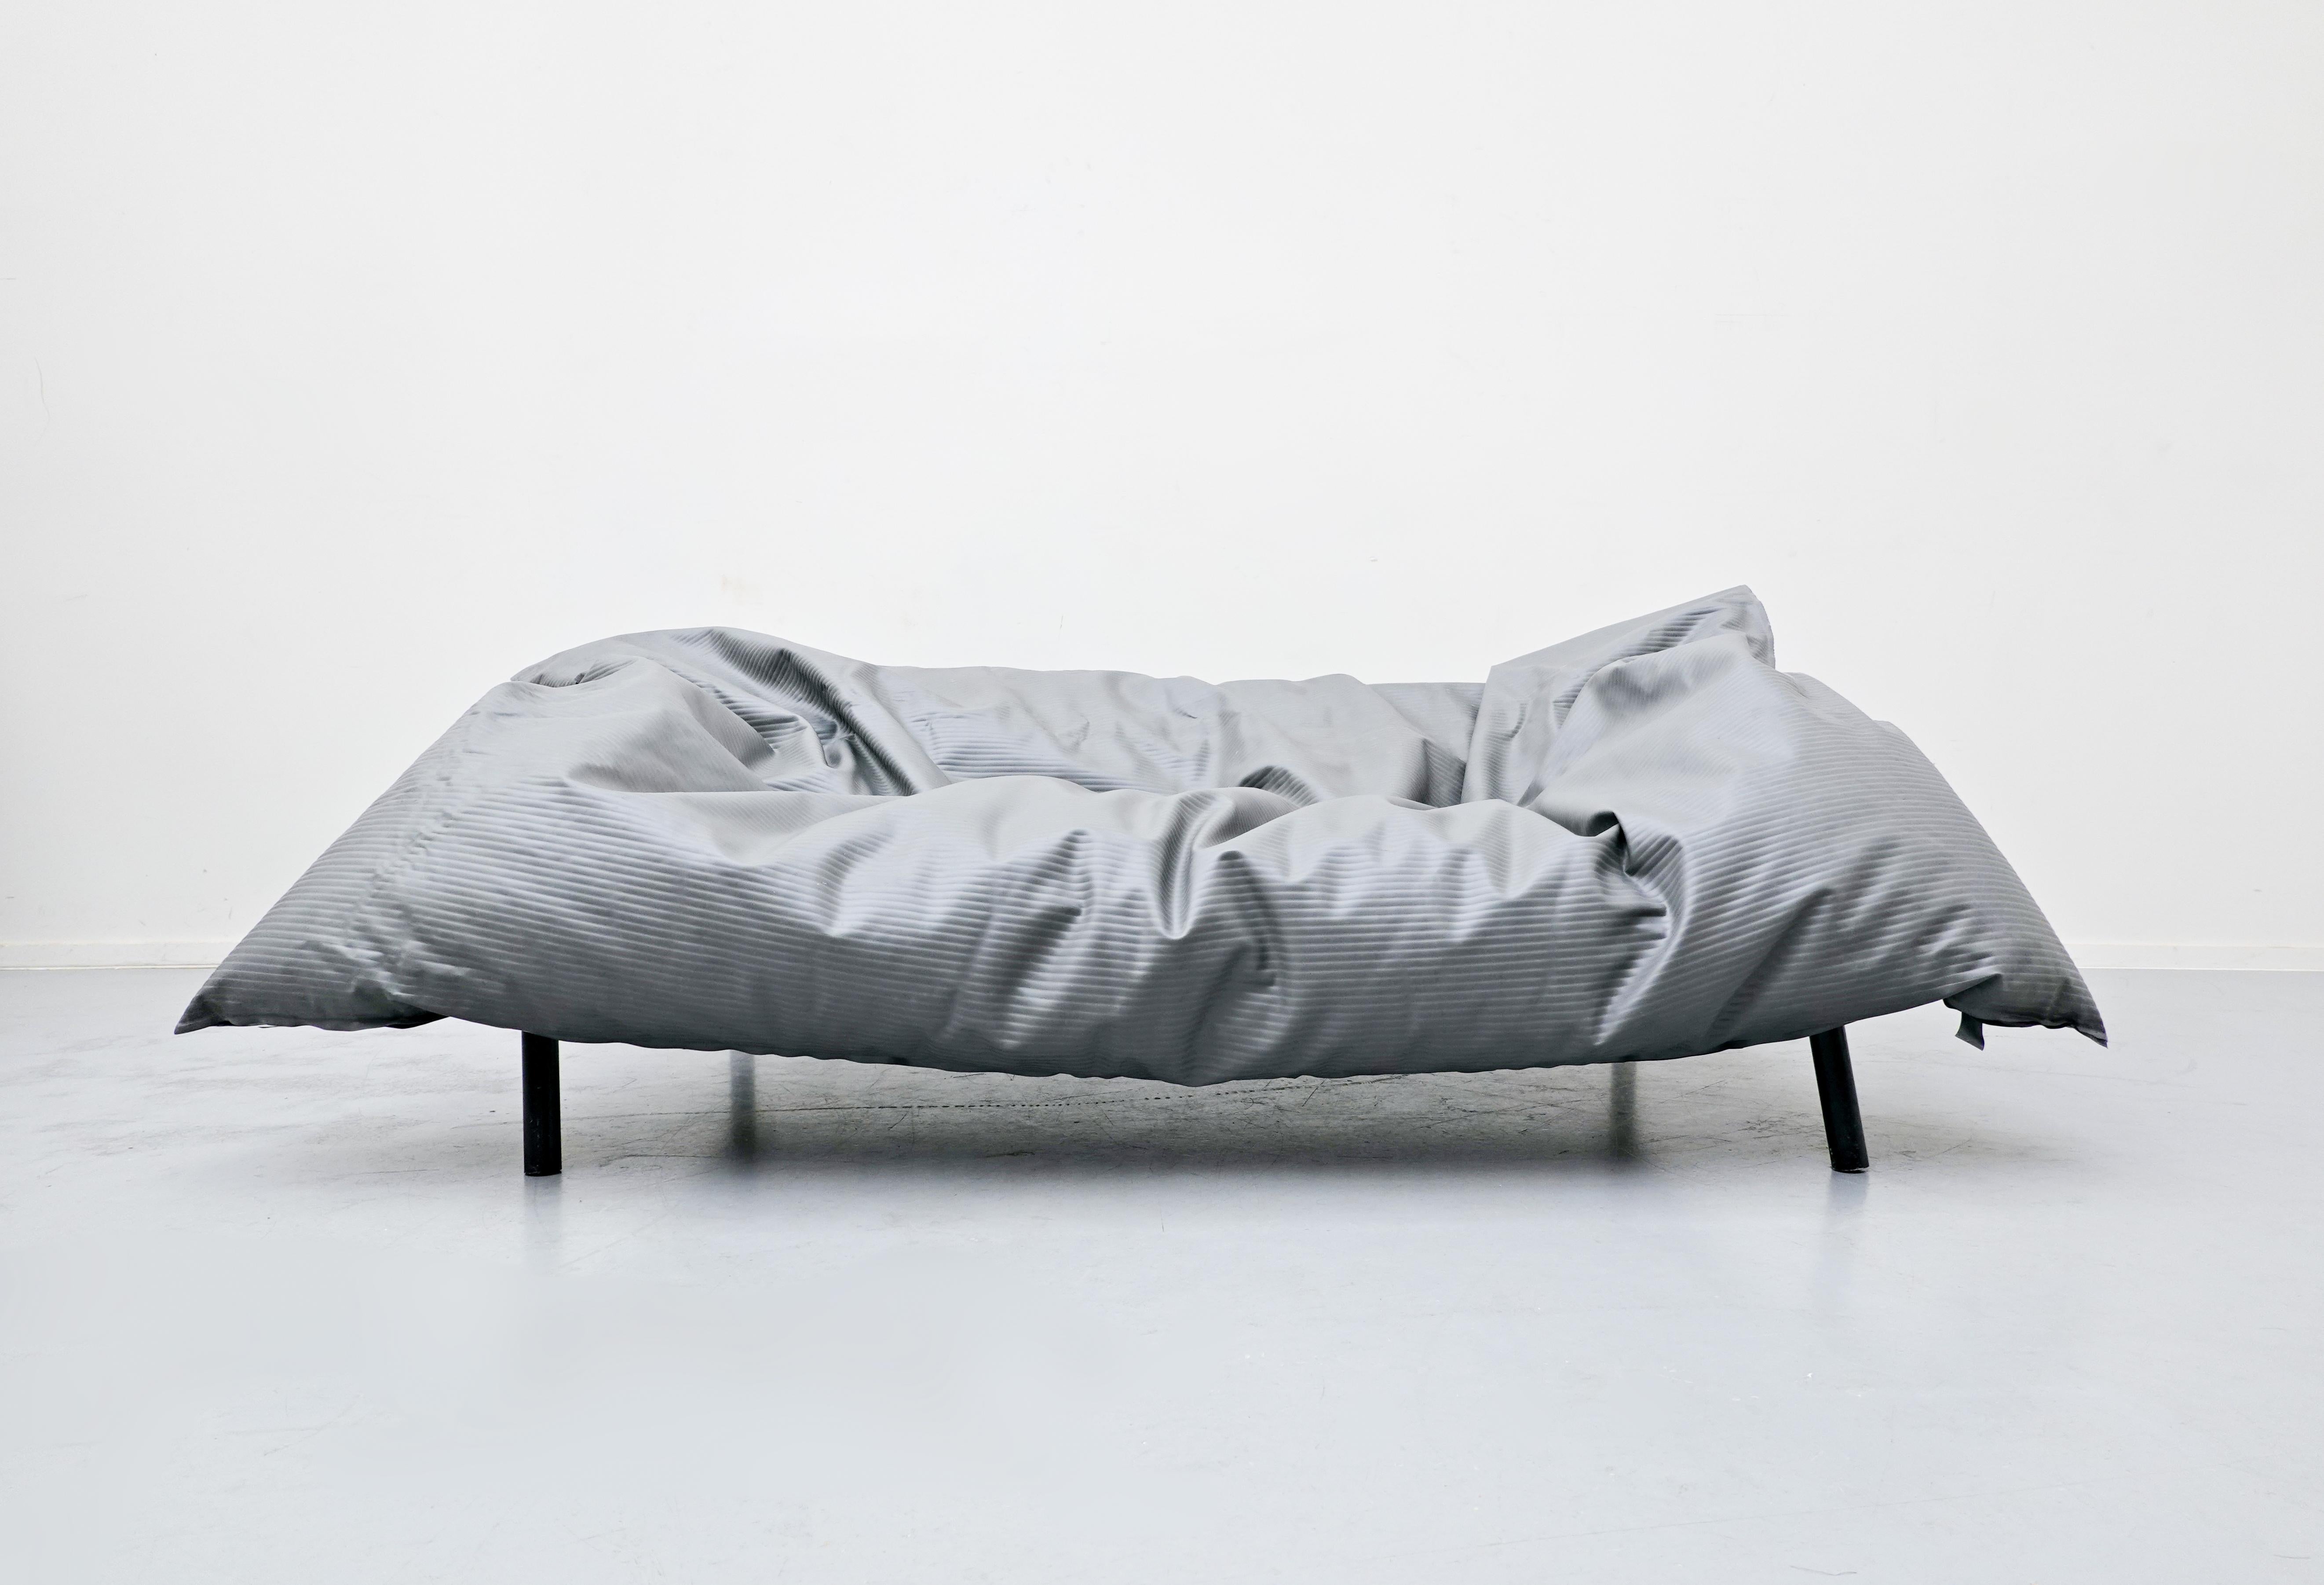 Late 20th Century Sofa Designed by Ron Arad for One/Off, United Kingdom, 1985